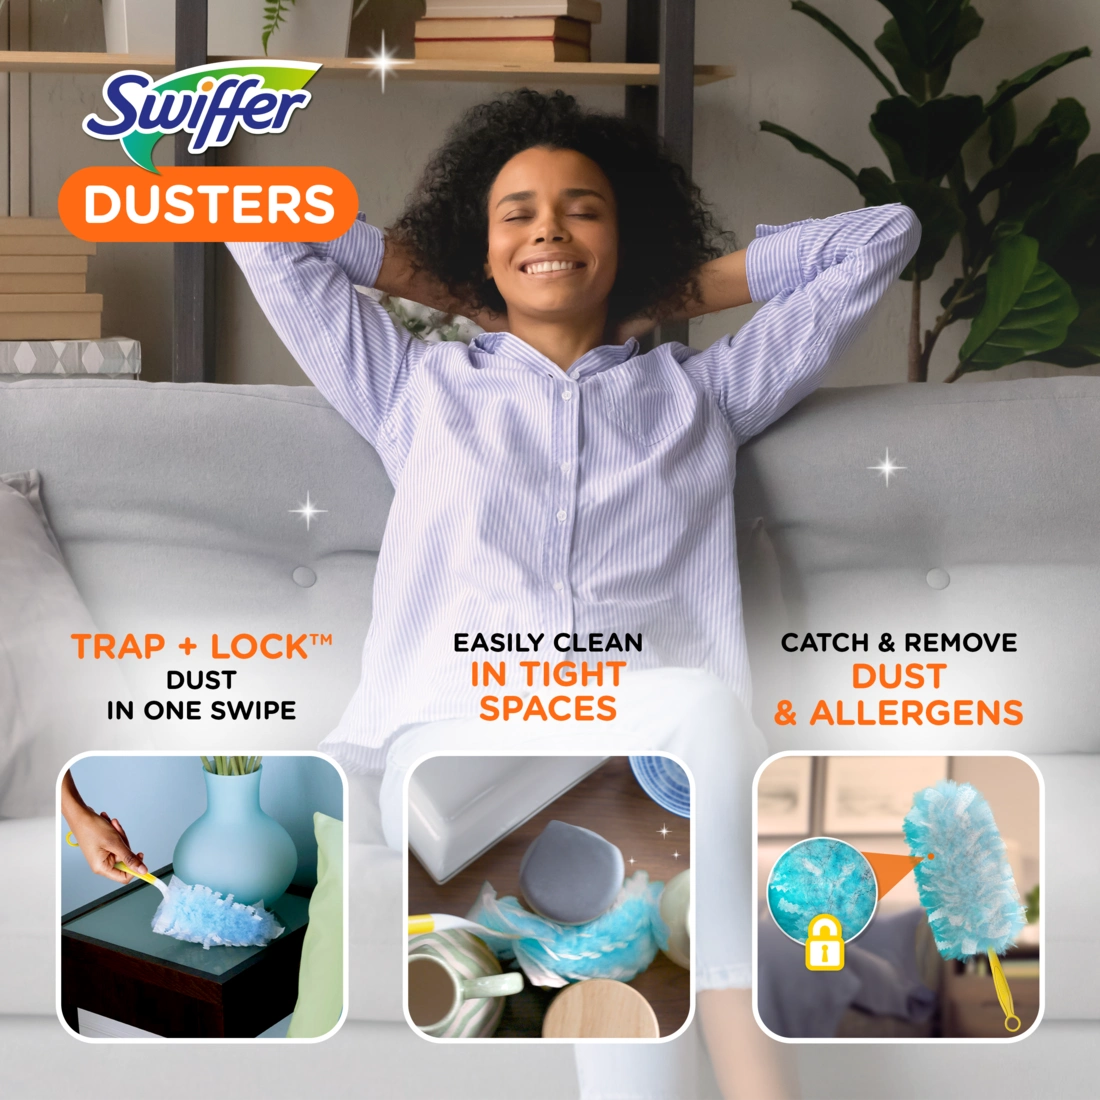 Swiffer Duster Reviews & Uses Around Your Home